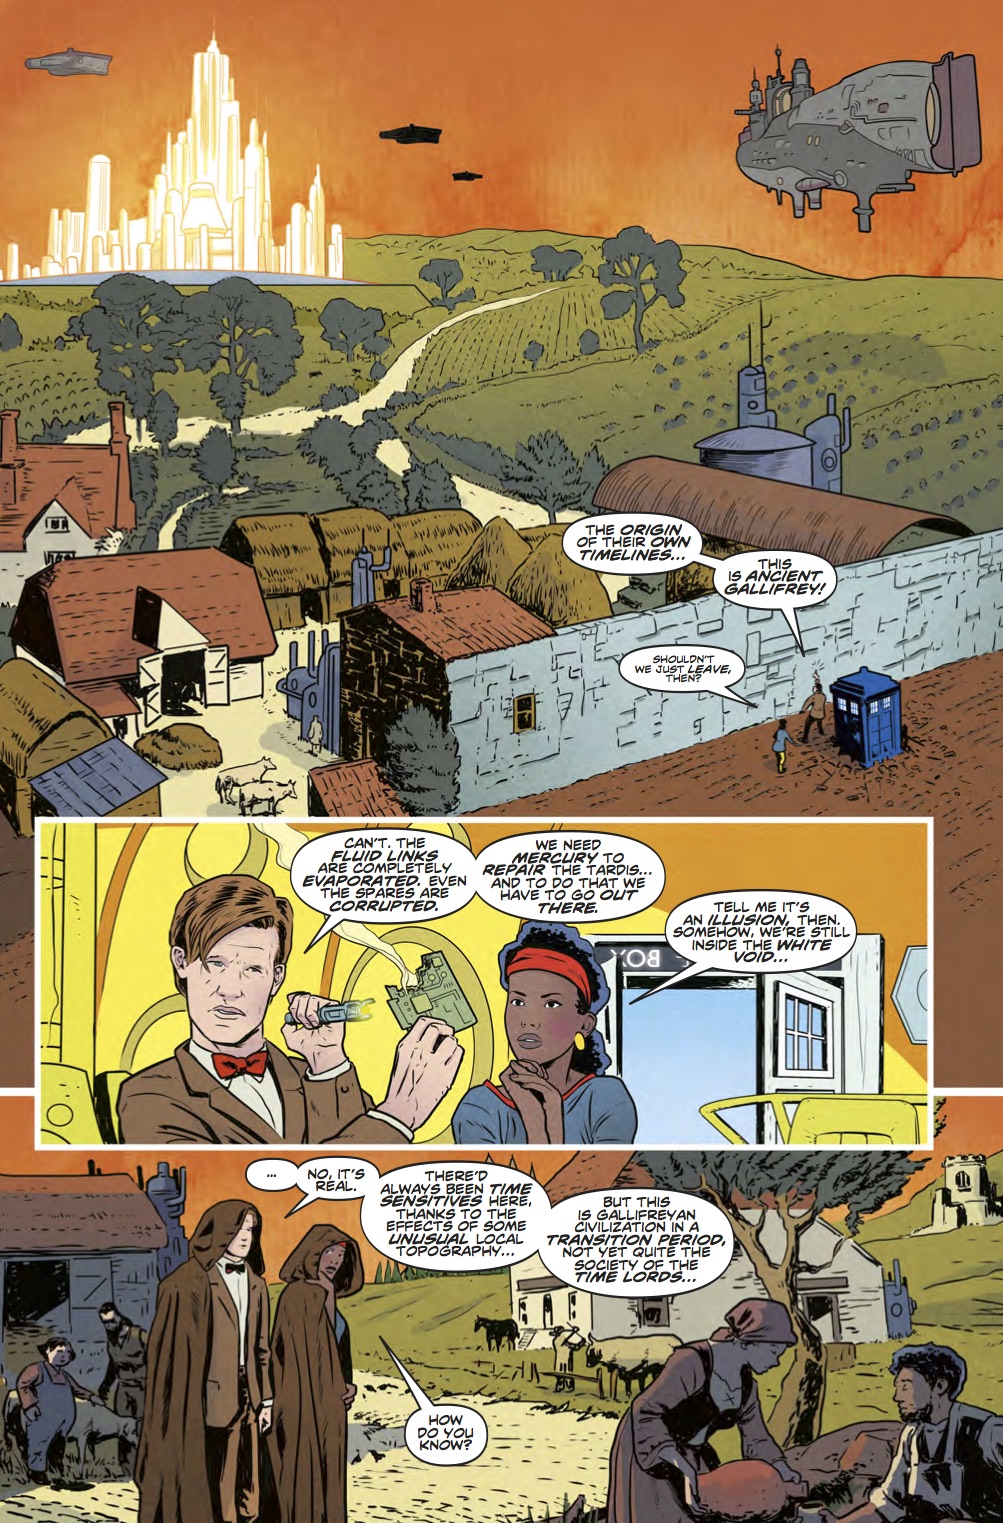 Doctor_Who_11D_3_10_Page 4